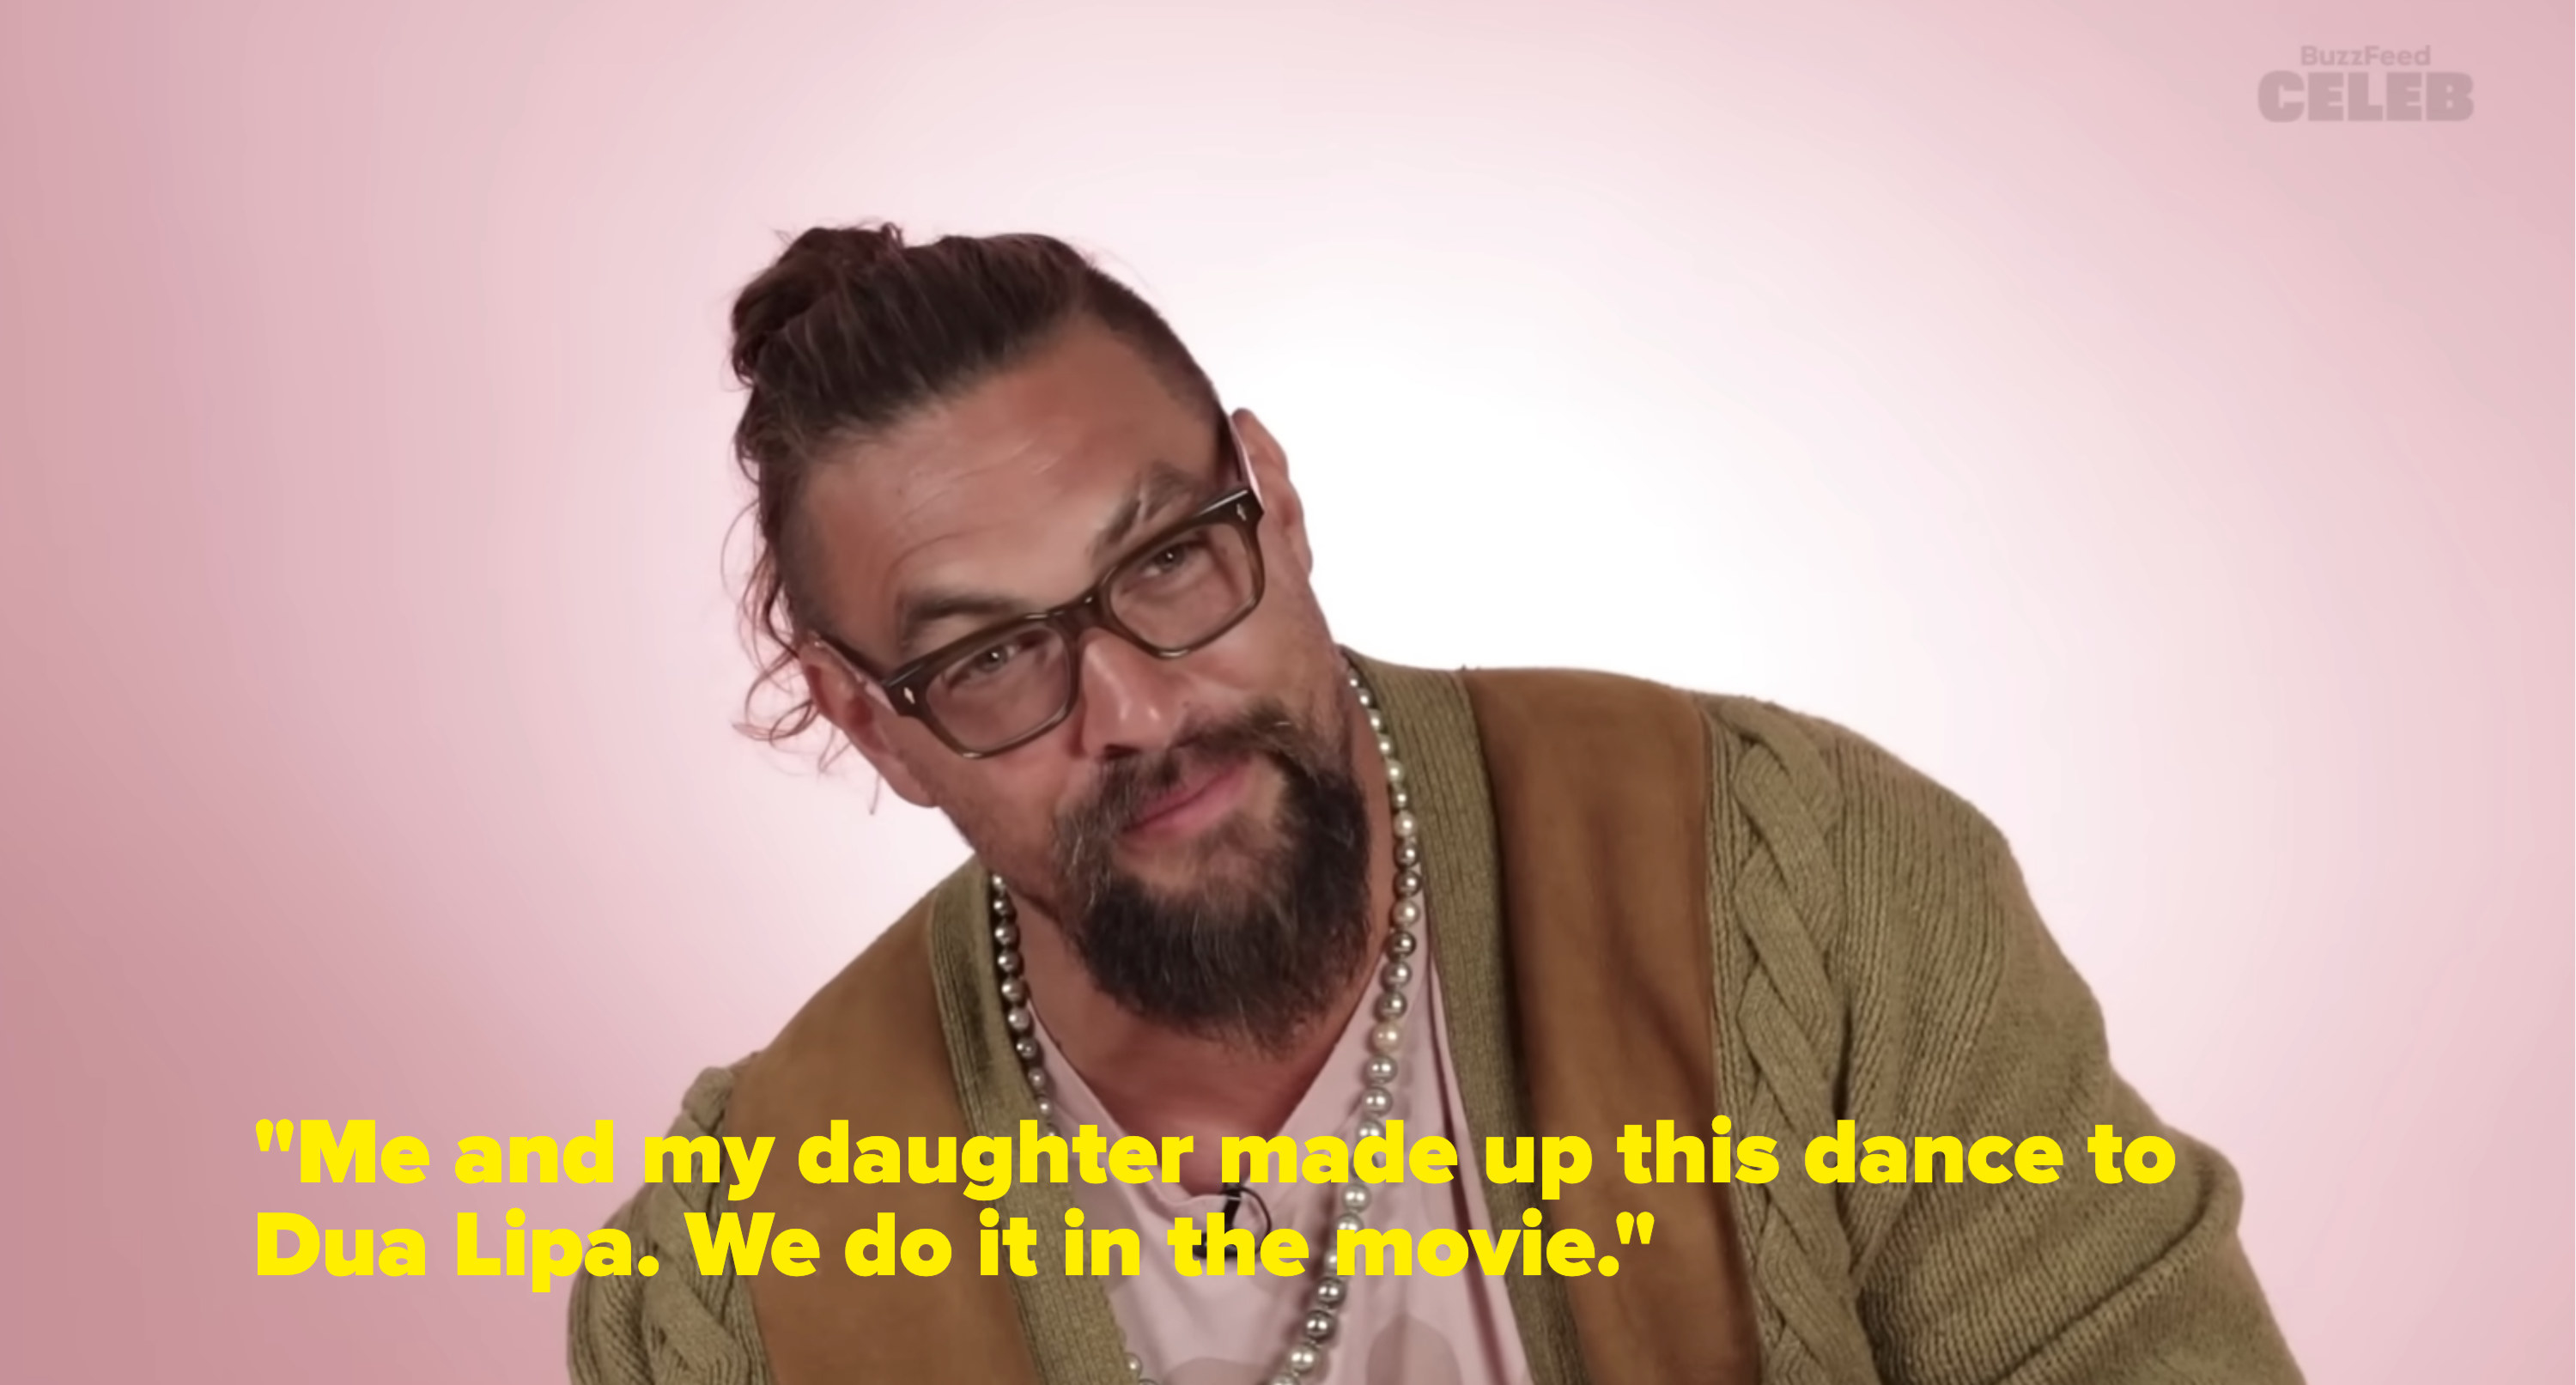 Jason says he and his daughter made up a dance to a Dua Lipa song that they did in the movie